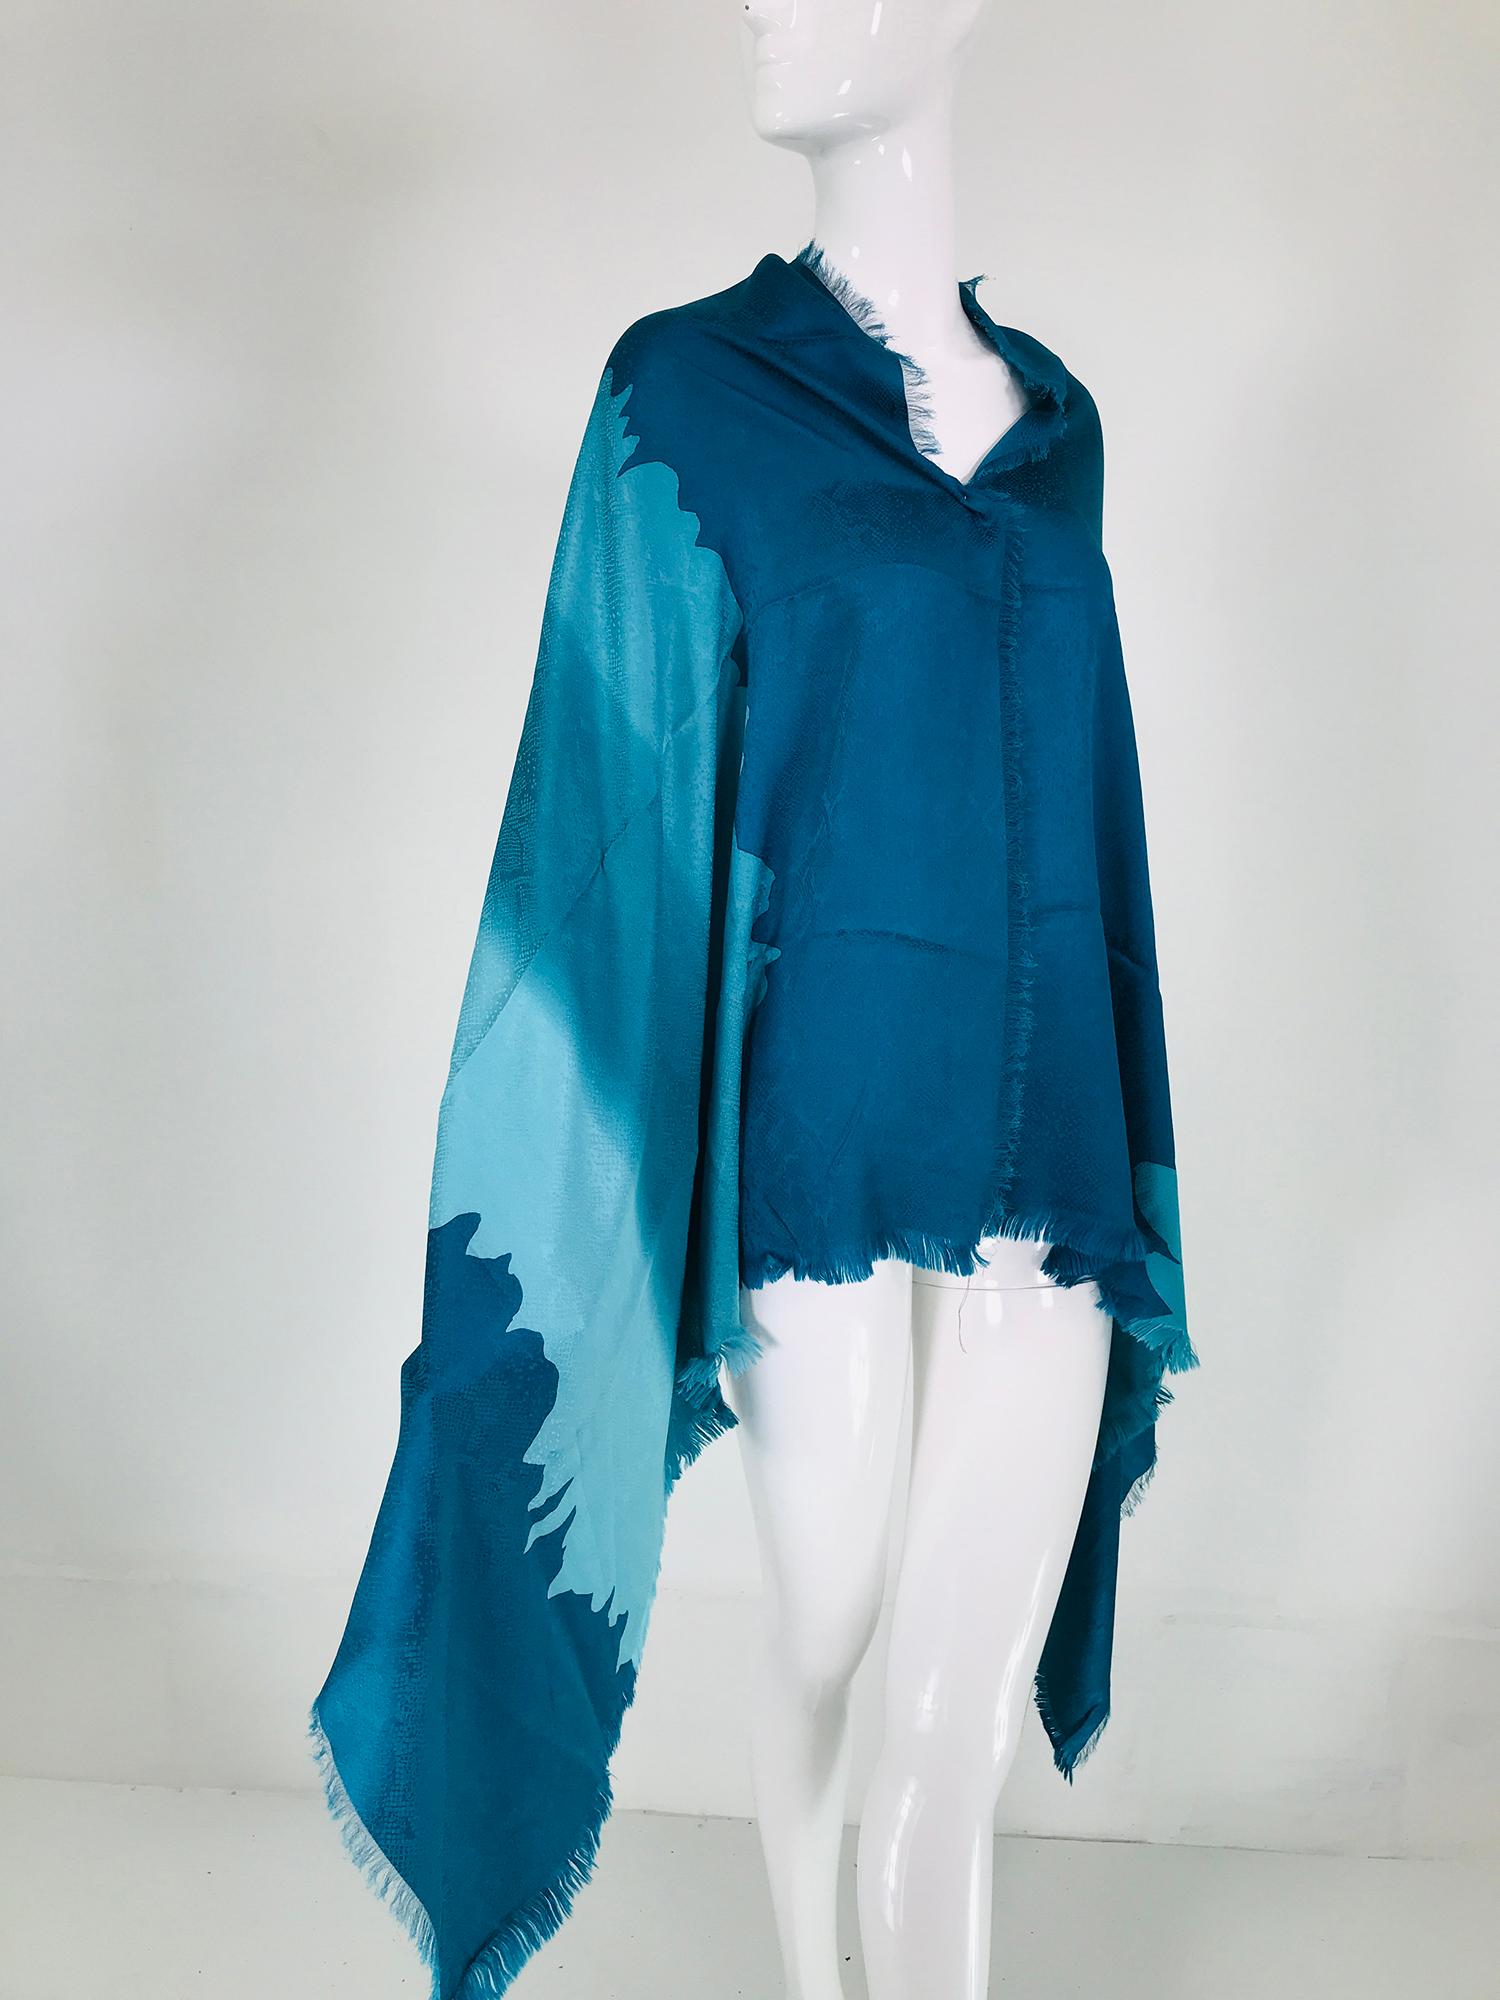 Yves Saint Laurent Rive Gauche X long rectangle, silk jacquard shawl/scarf with self fringe on 4 sides.
The design is snake skin in shades of aqua & turquoise blue, a beautiful scarf with many uses, in excellent condition, barely, if ever used. 34